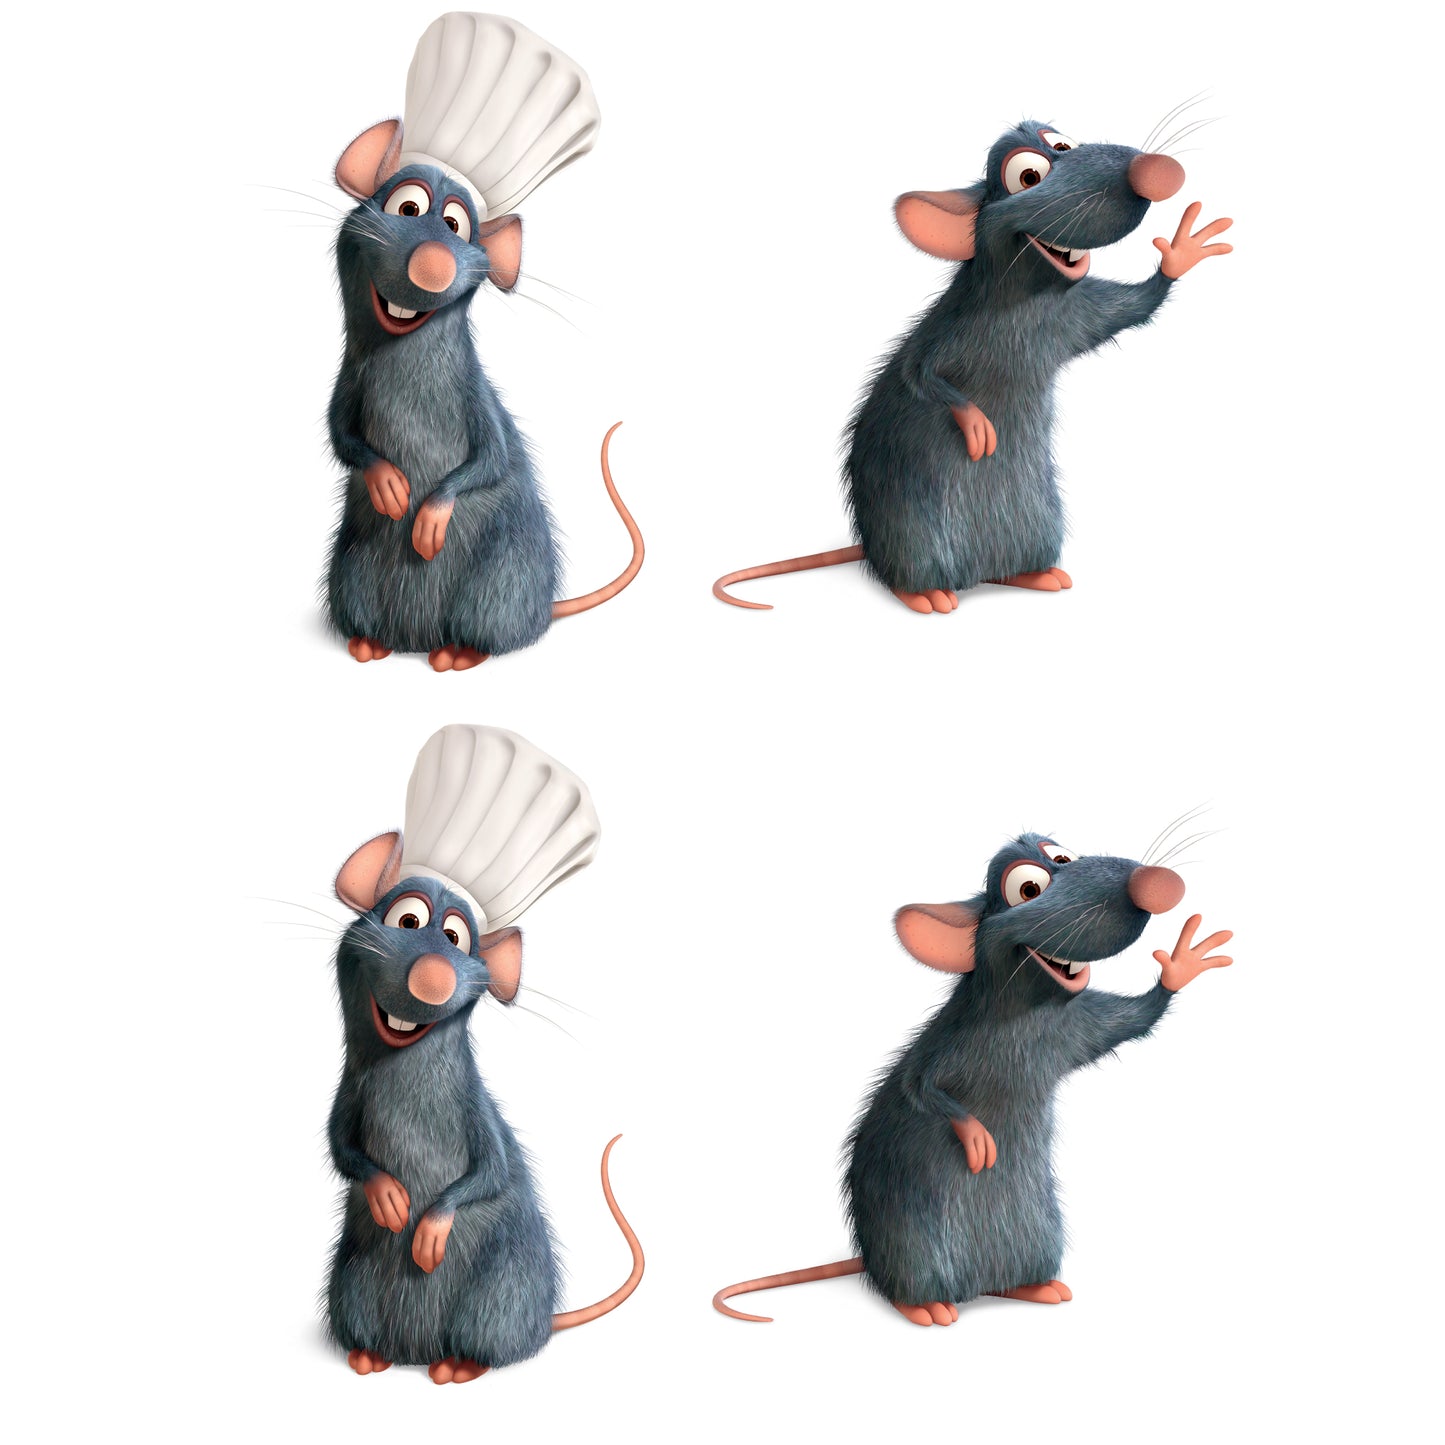 Sheet of 4 -Ratatouille: Remy Minis - Officially Licensed Disney Removable Adhesive Decal